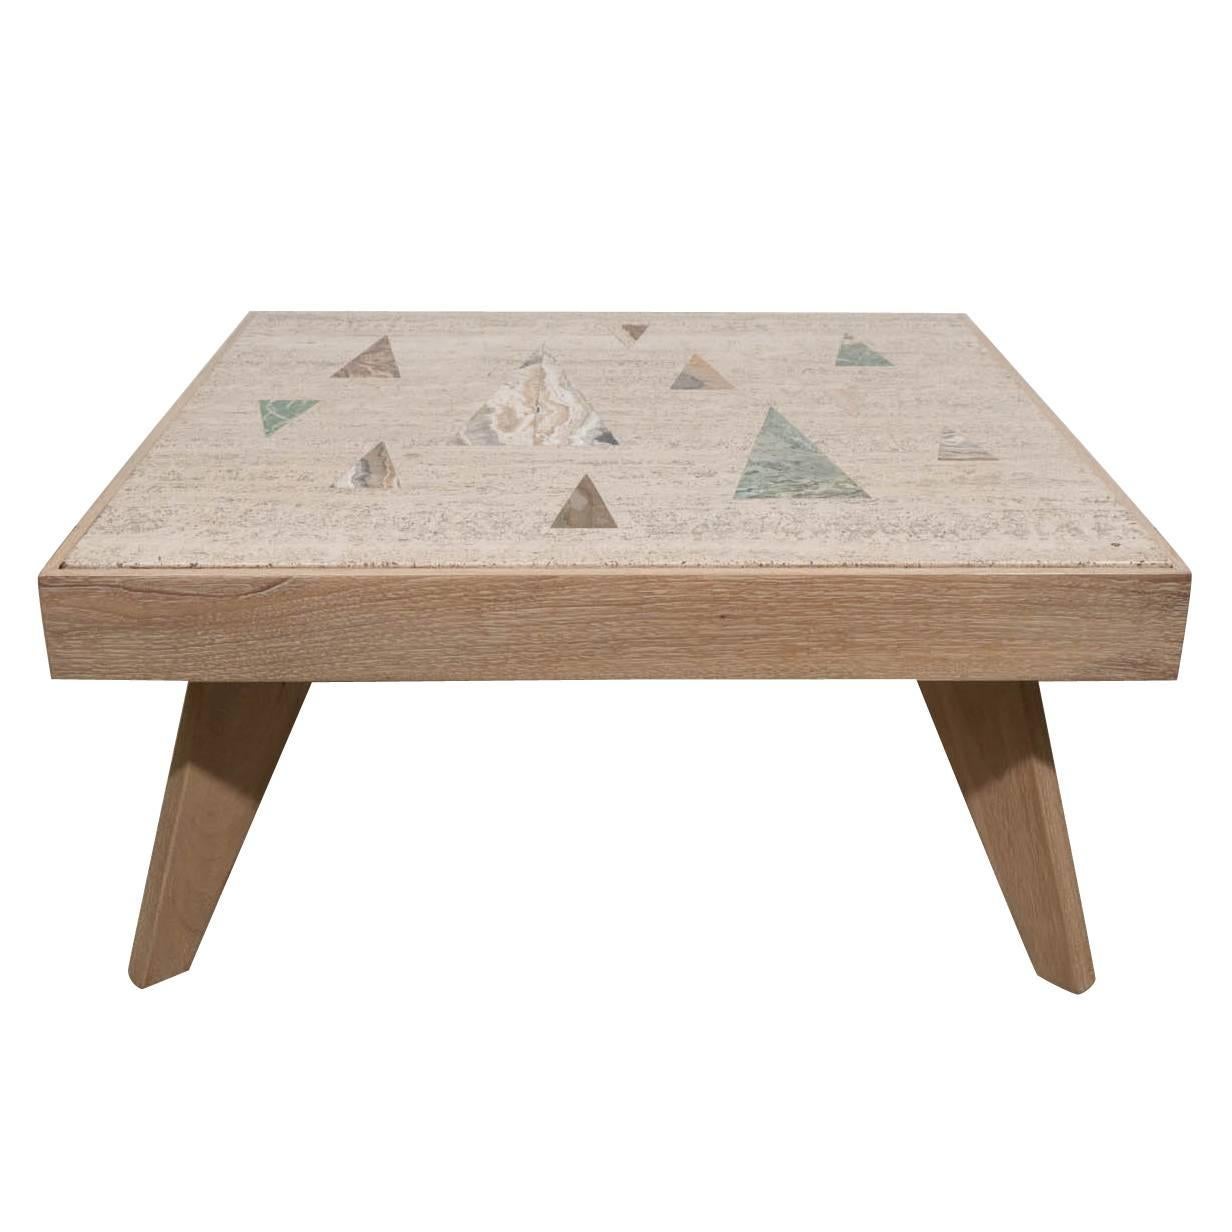 A Richard Blow for Montici inlayed travertine Coffee Table, 1950s For Sale